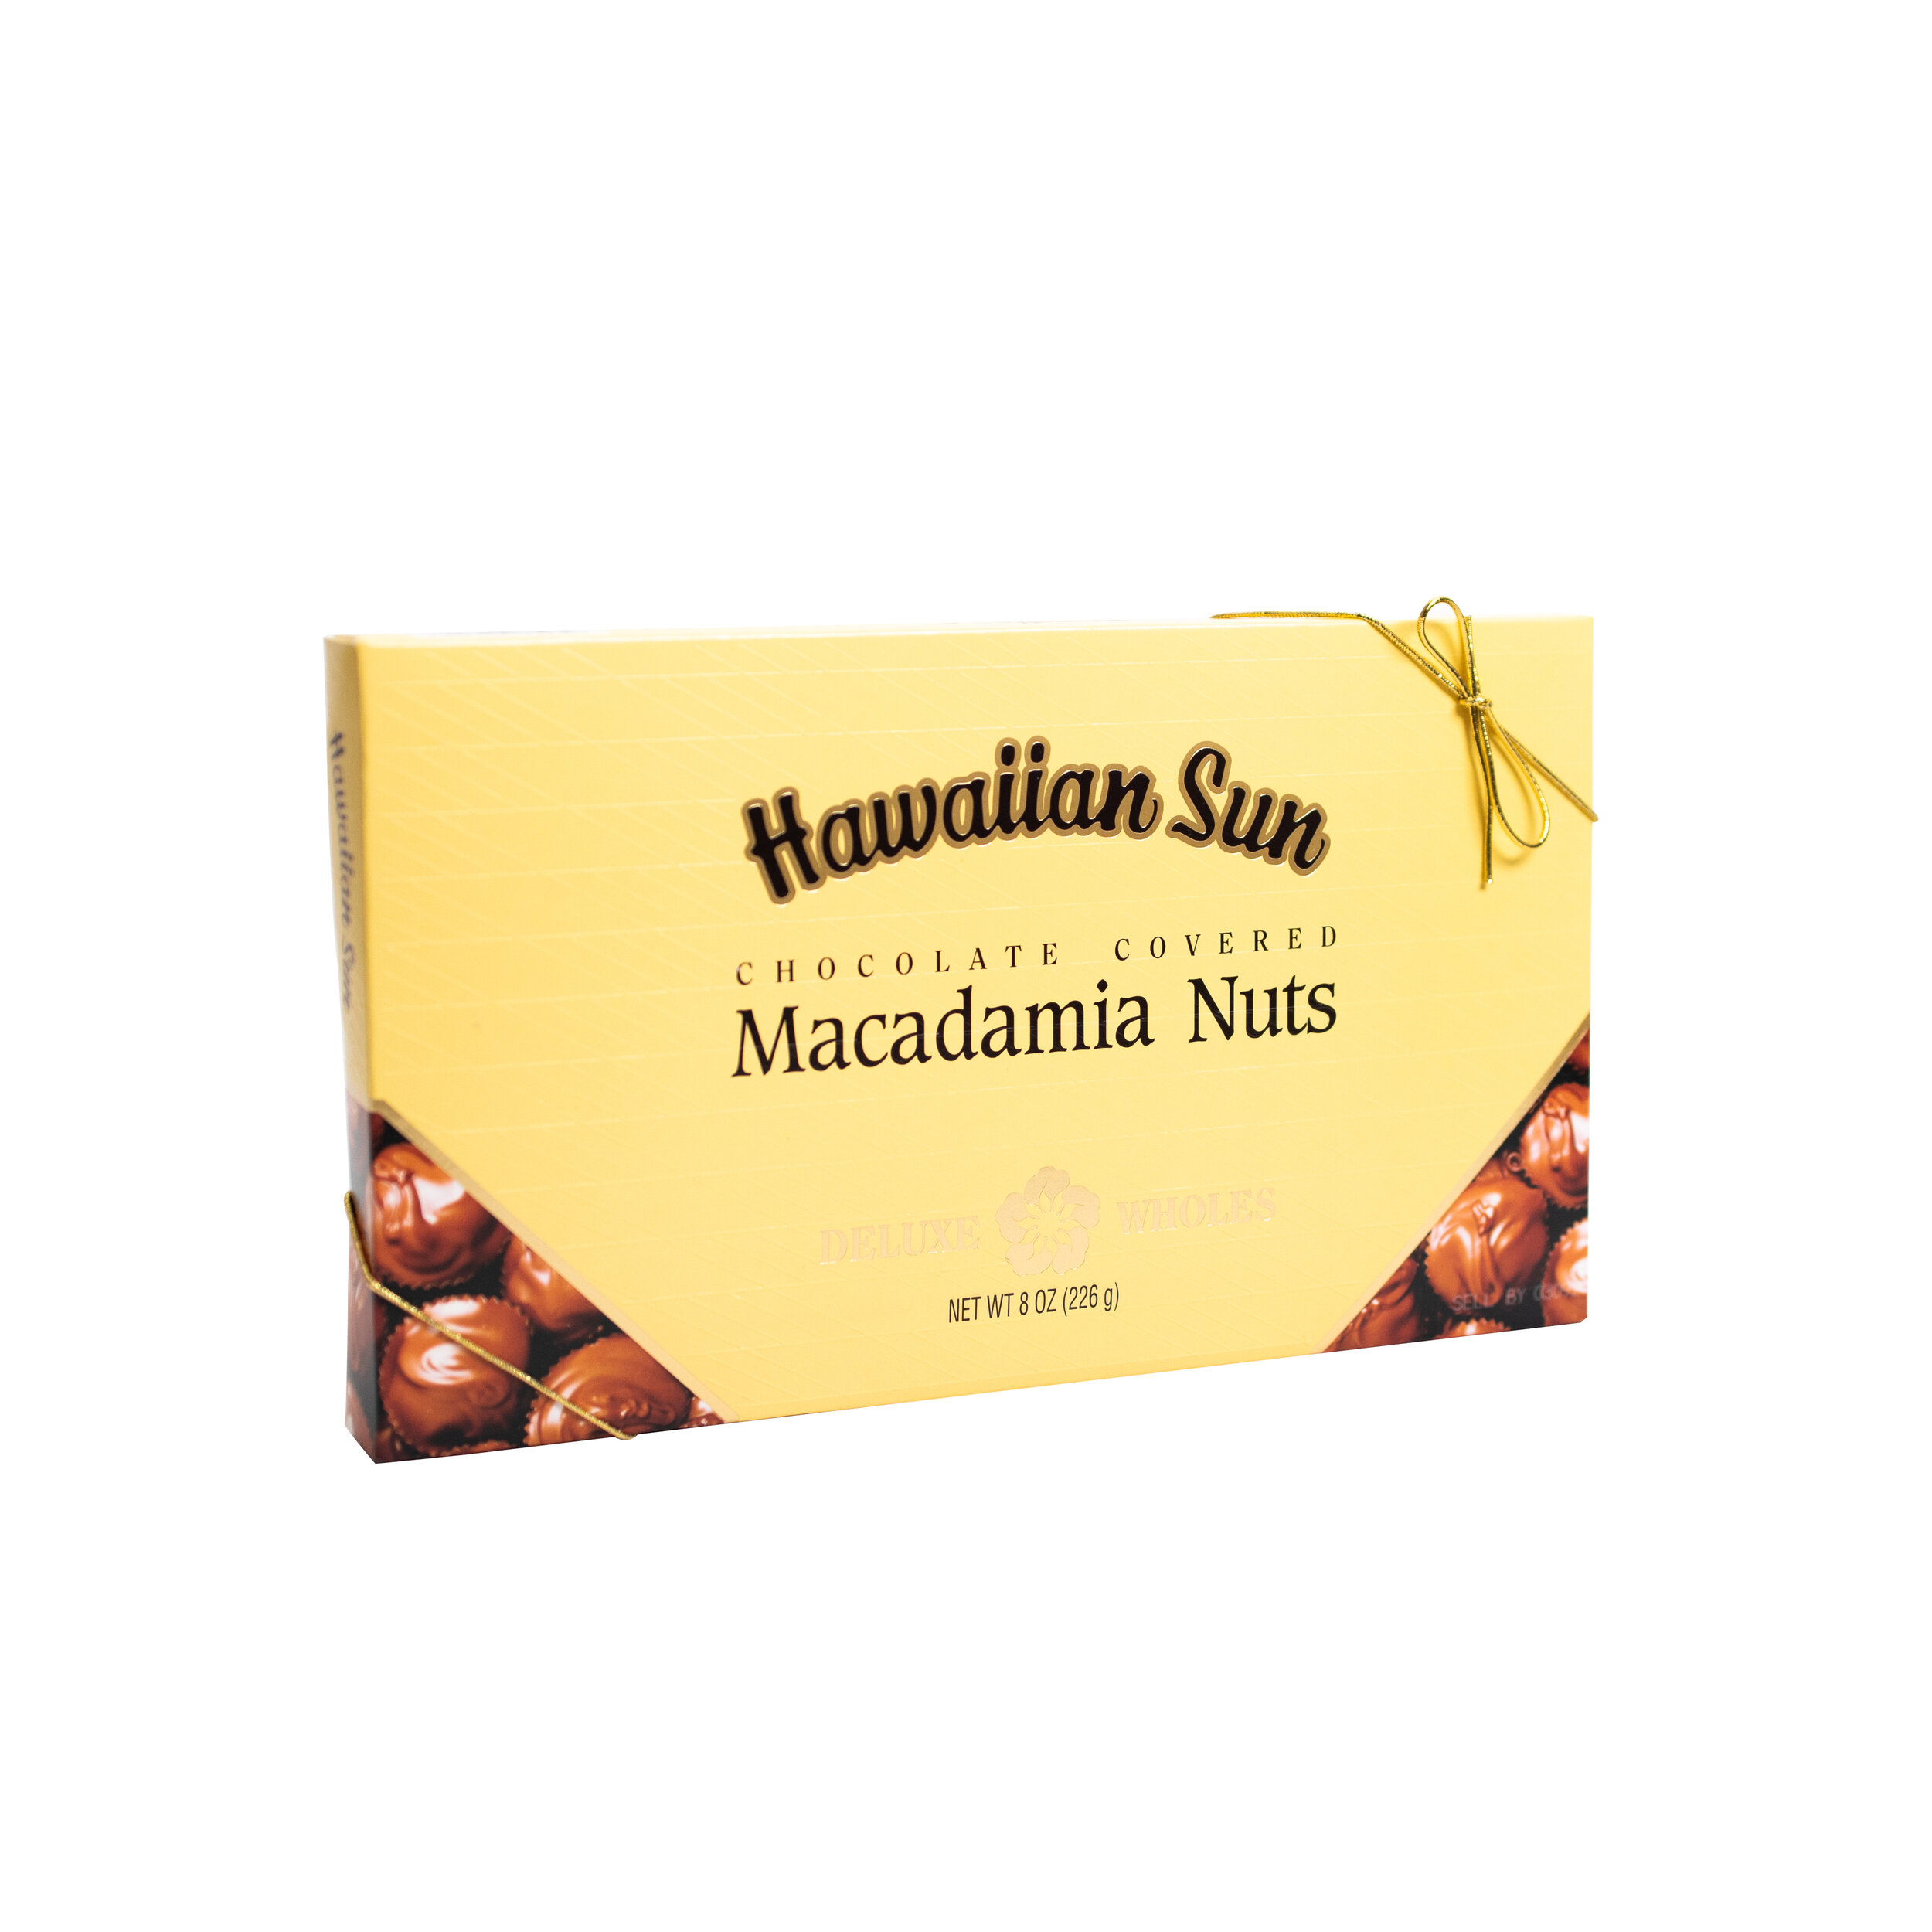 Deluxe Wholes Chocolate Covered Macadamia Nuts